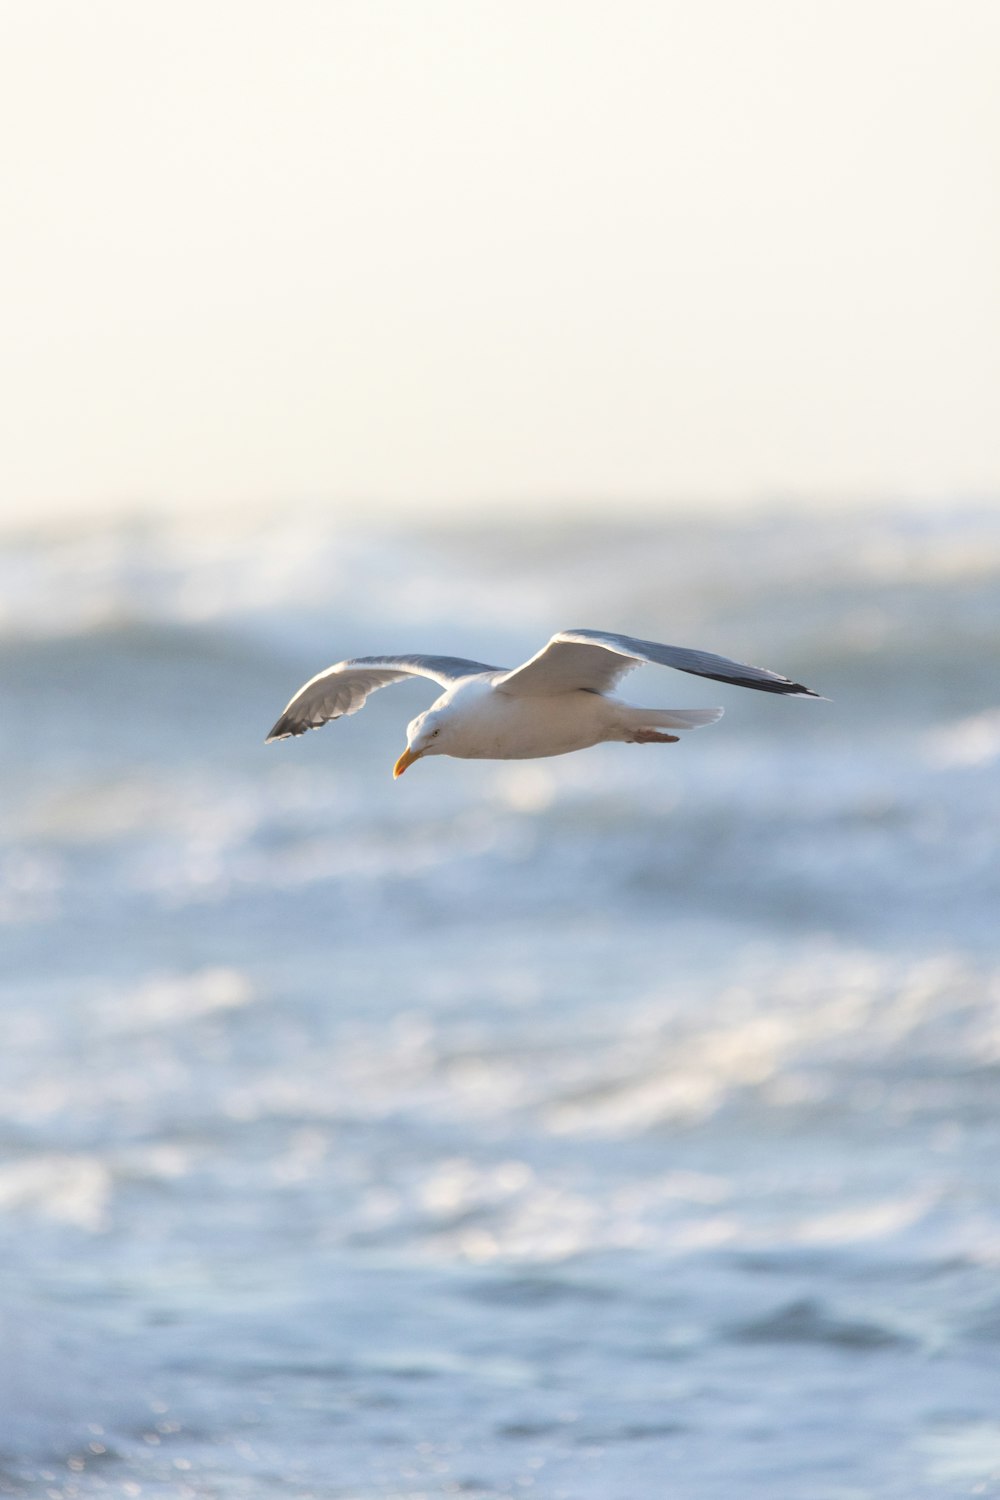 a seagull flying over the ocean